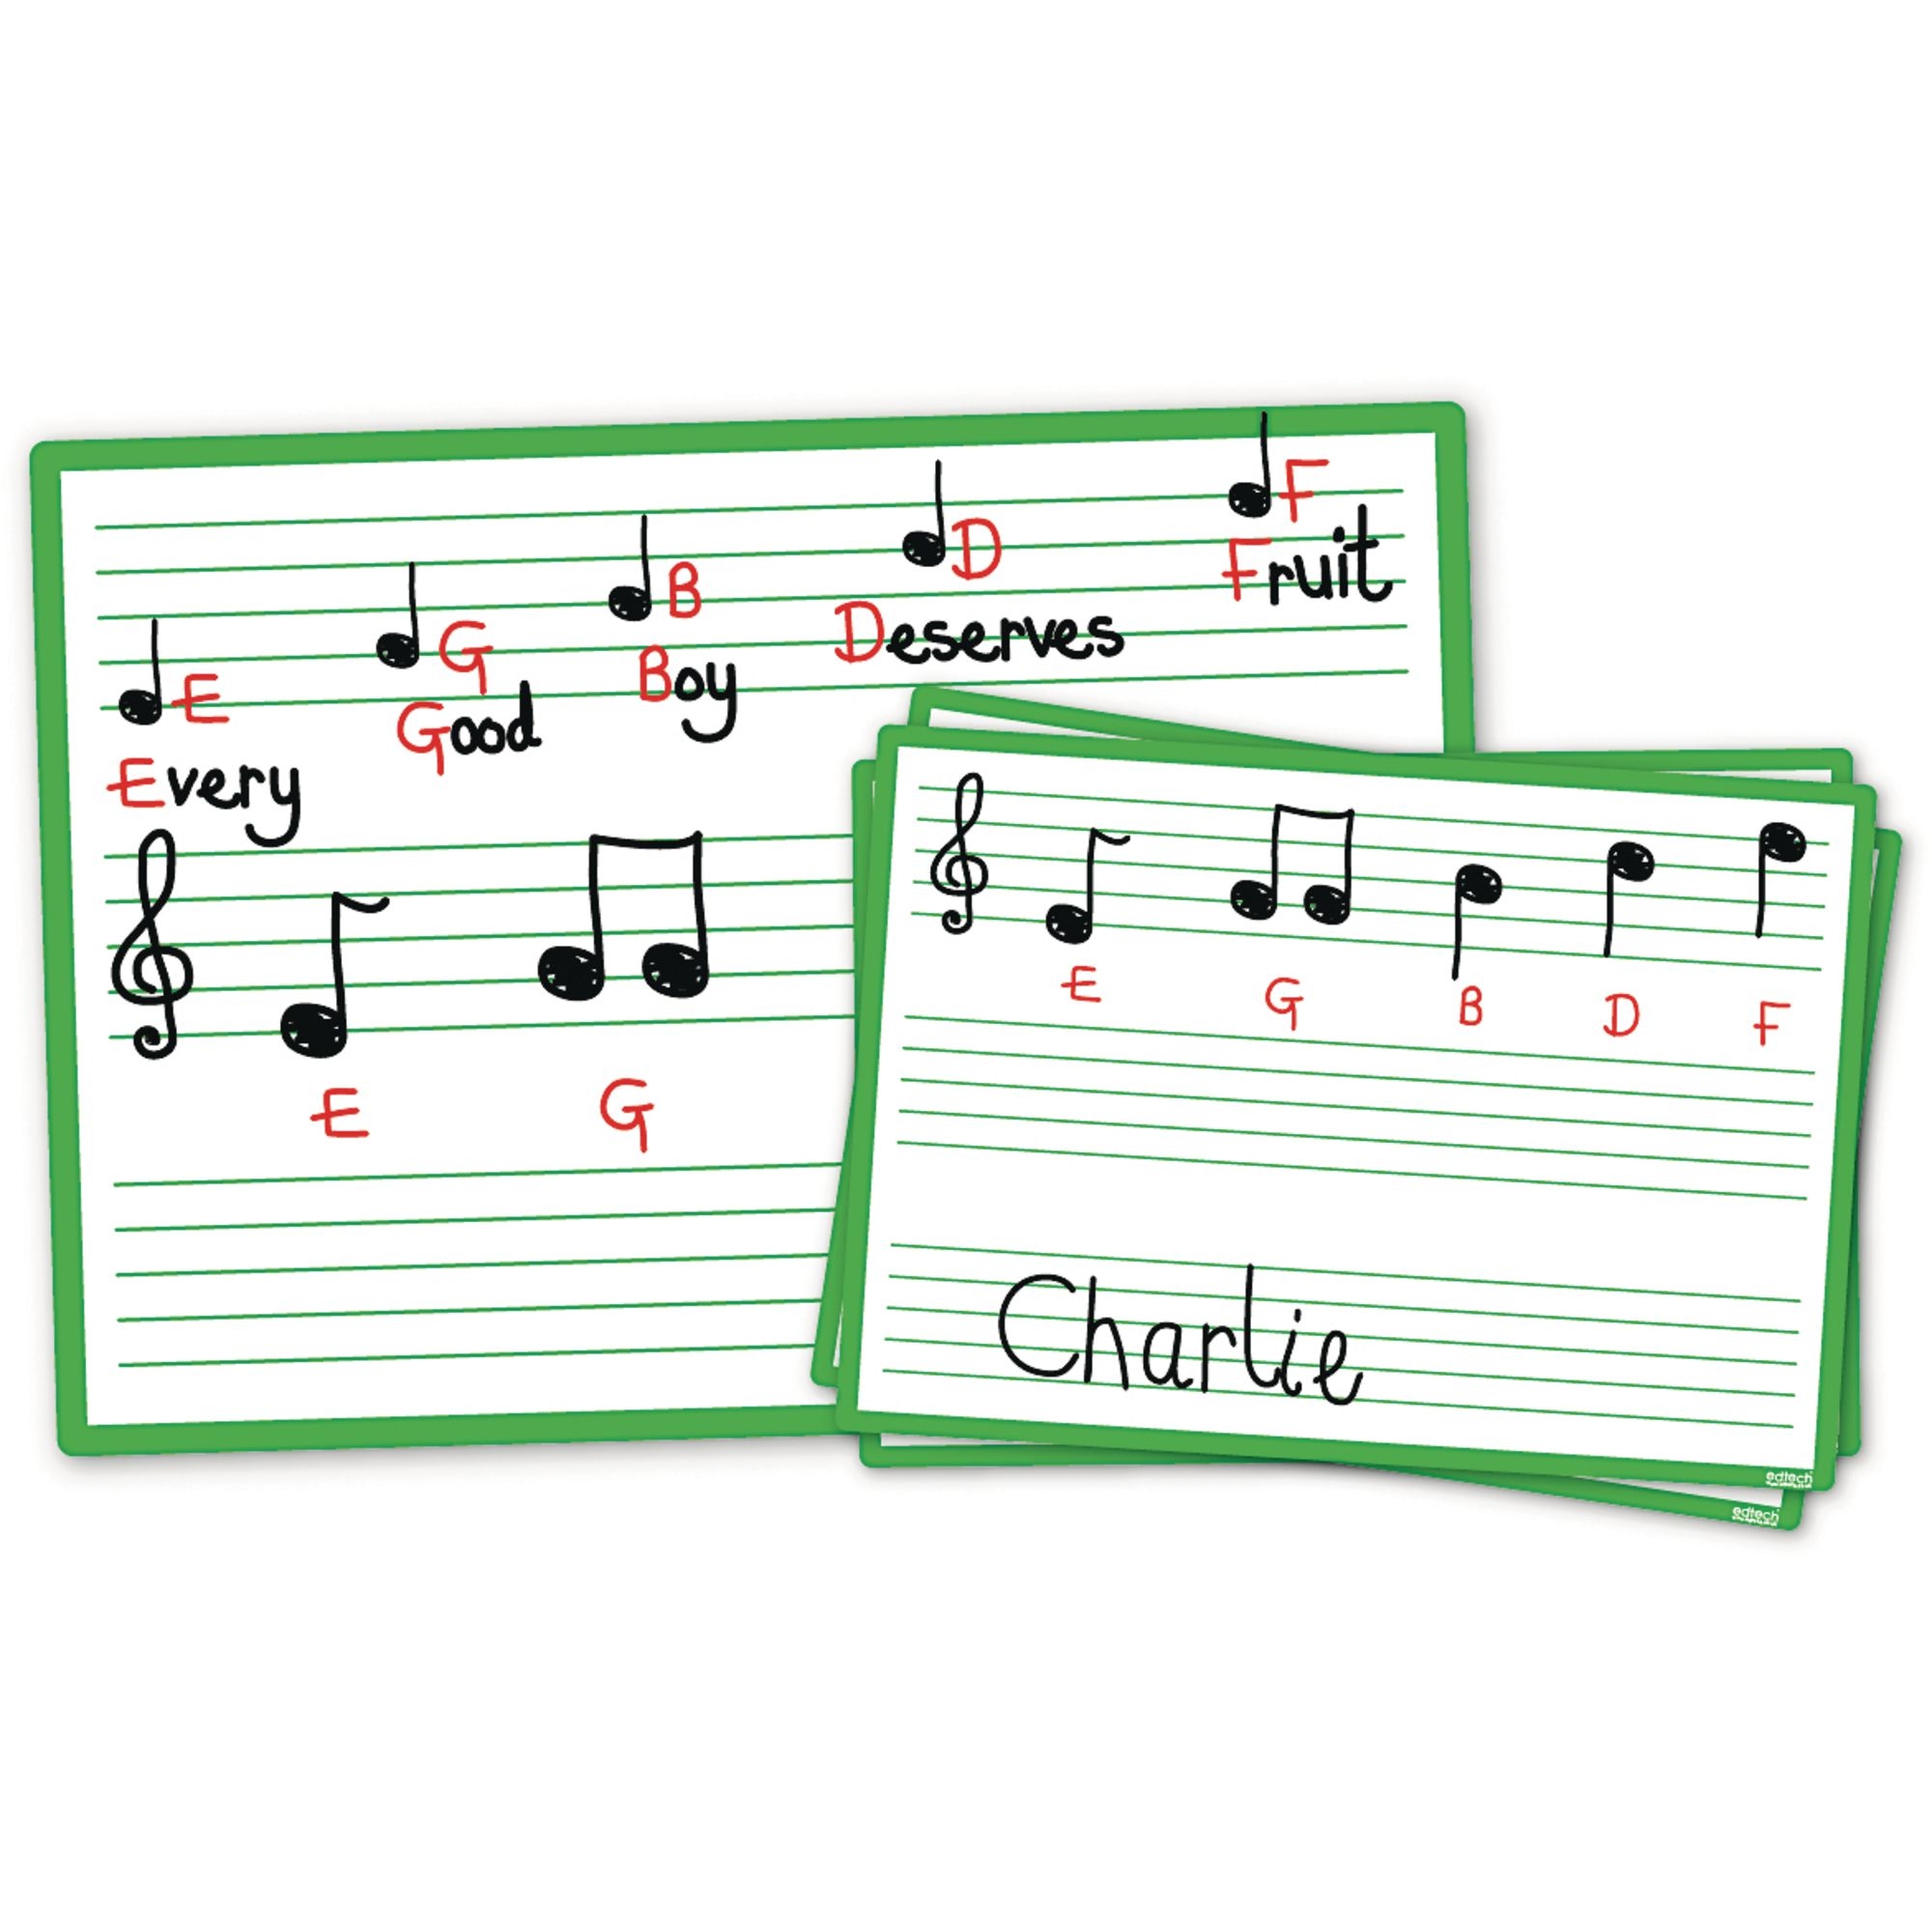 Music A4 Dry-wipe Boards - Pack of 30